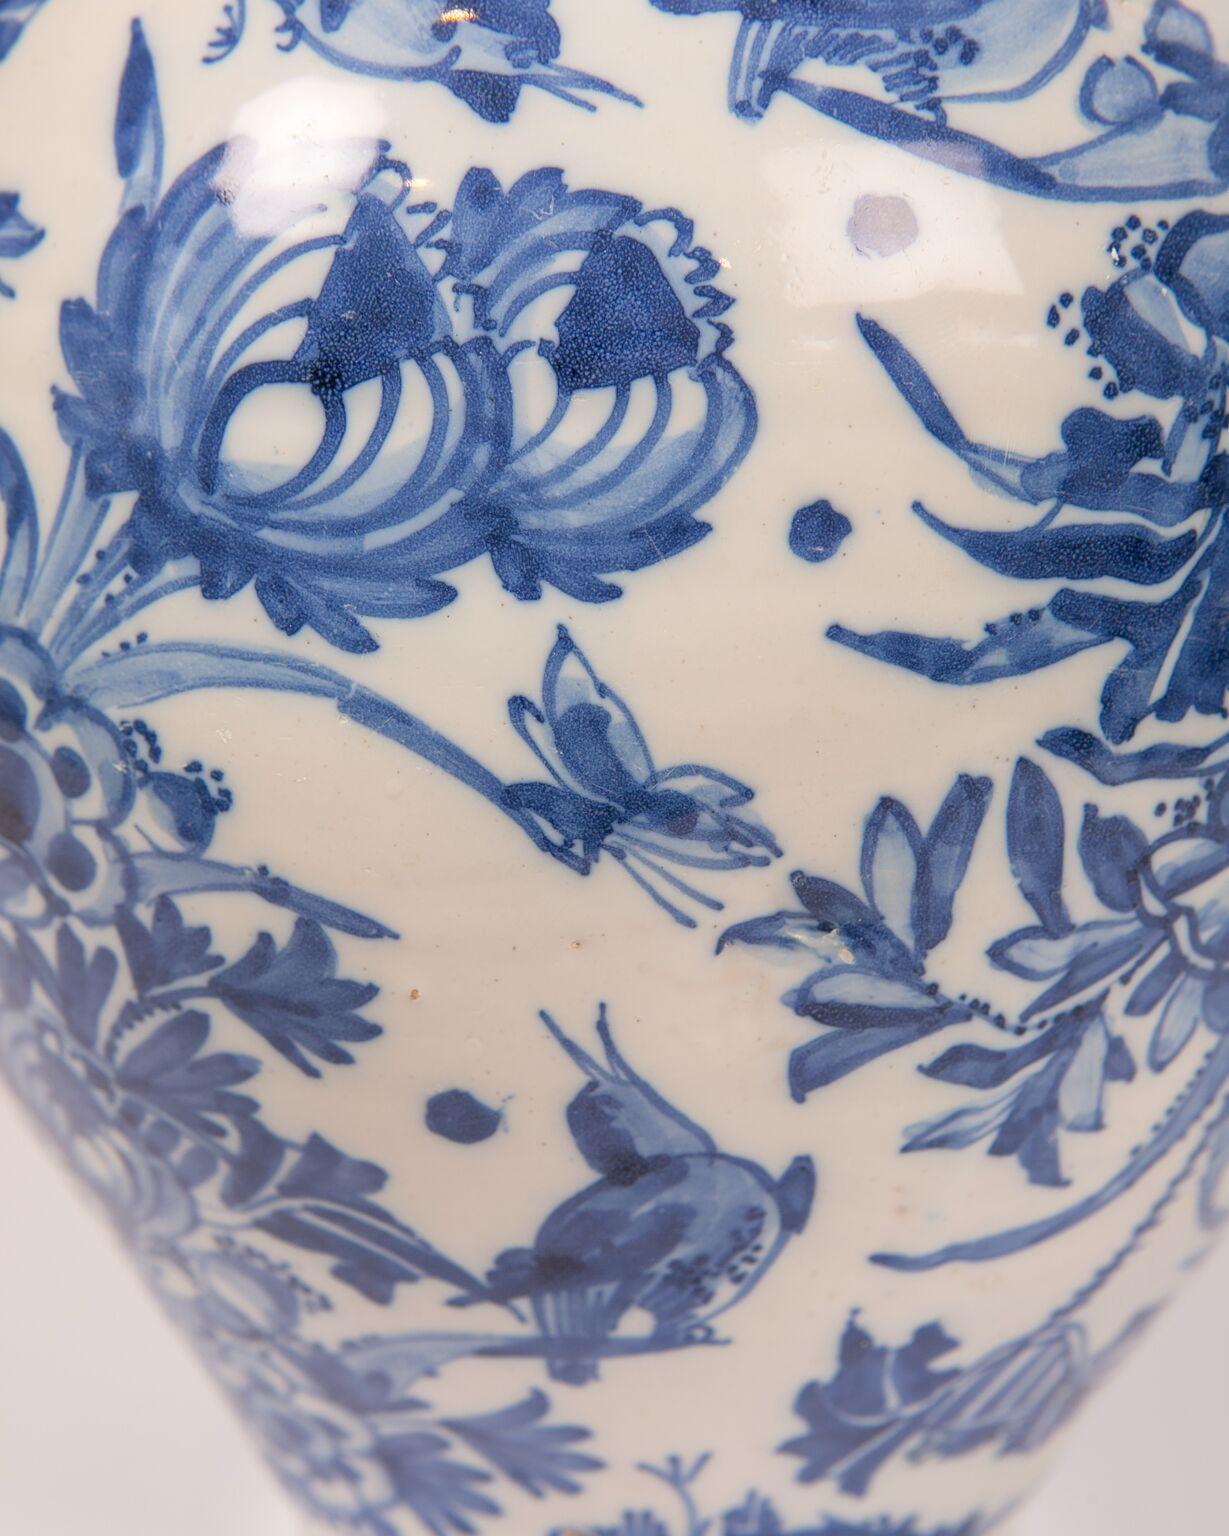 London Delftware Blue and White Flower Vase 17th Century circa 1685 4